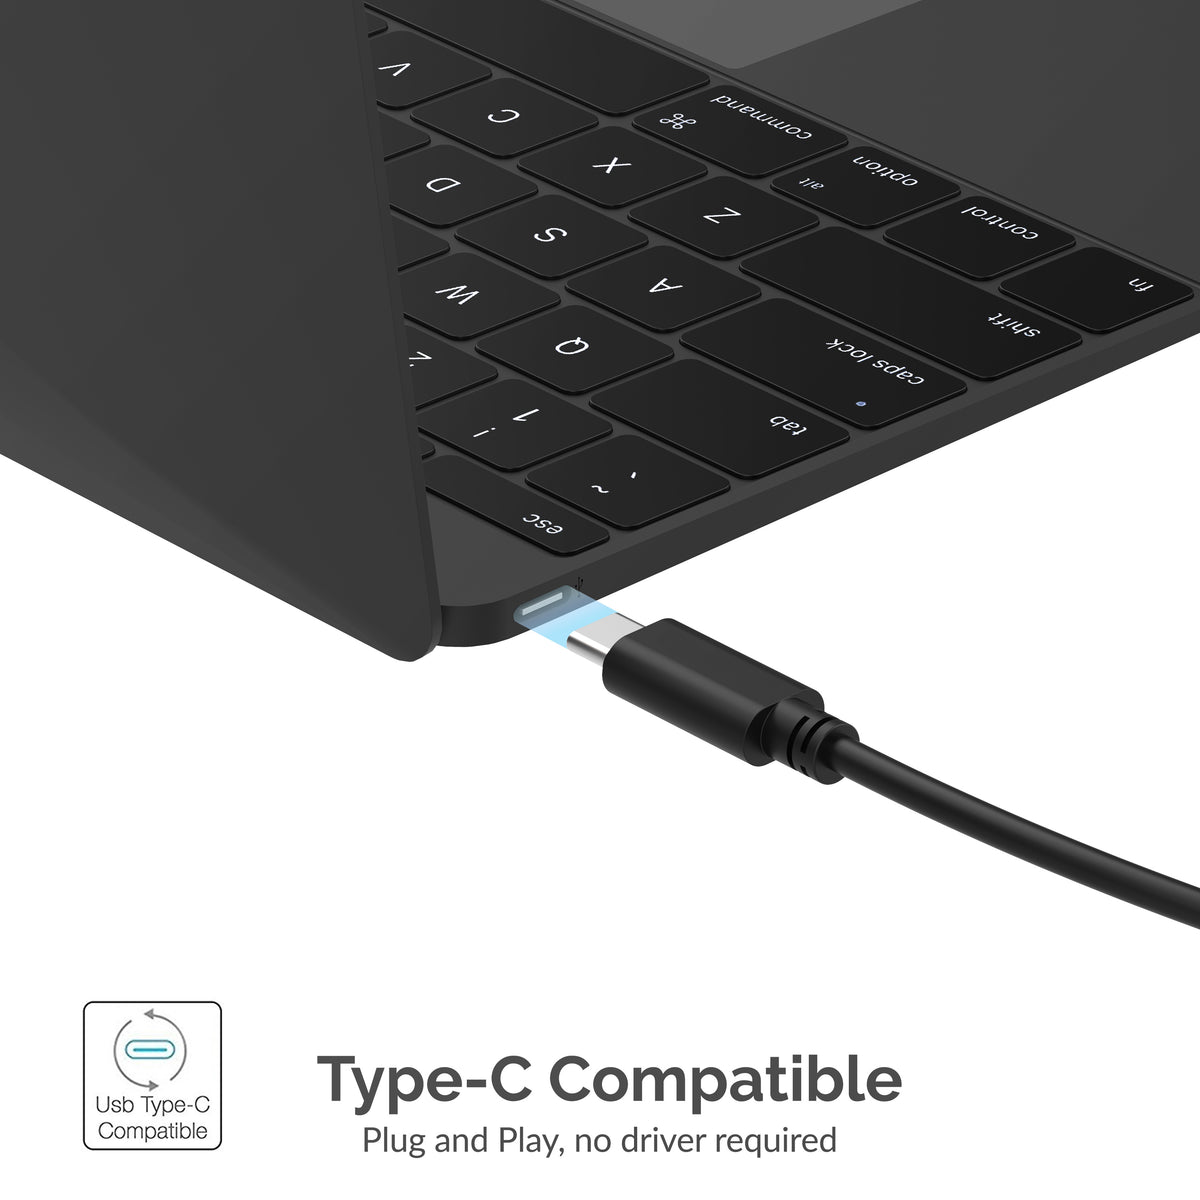 USB Type-A or Type-C to 5-Gigabit Ethernet Adapter [10/100/1000/2500/5000 Mbps]